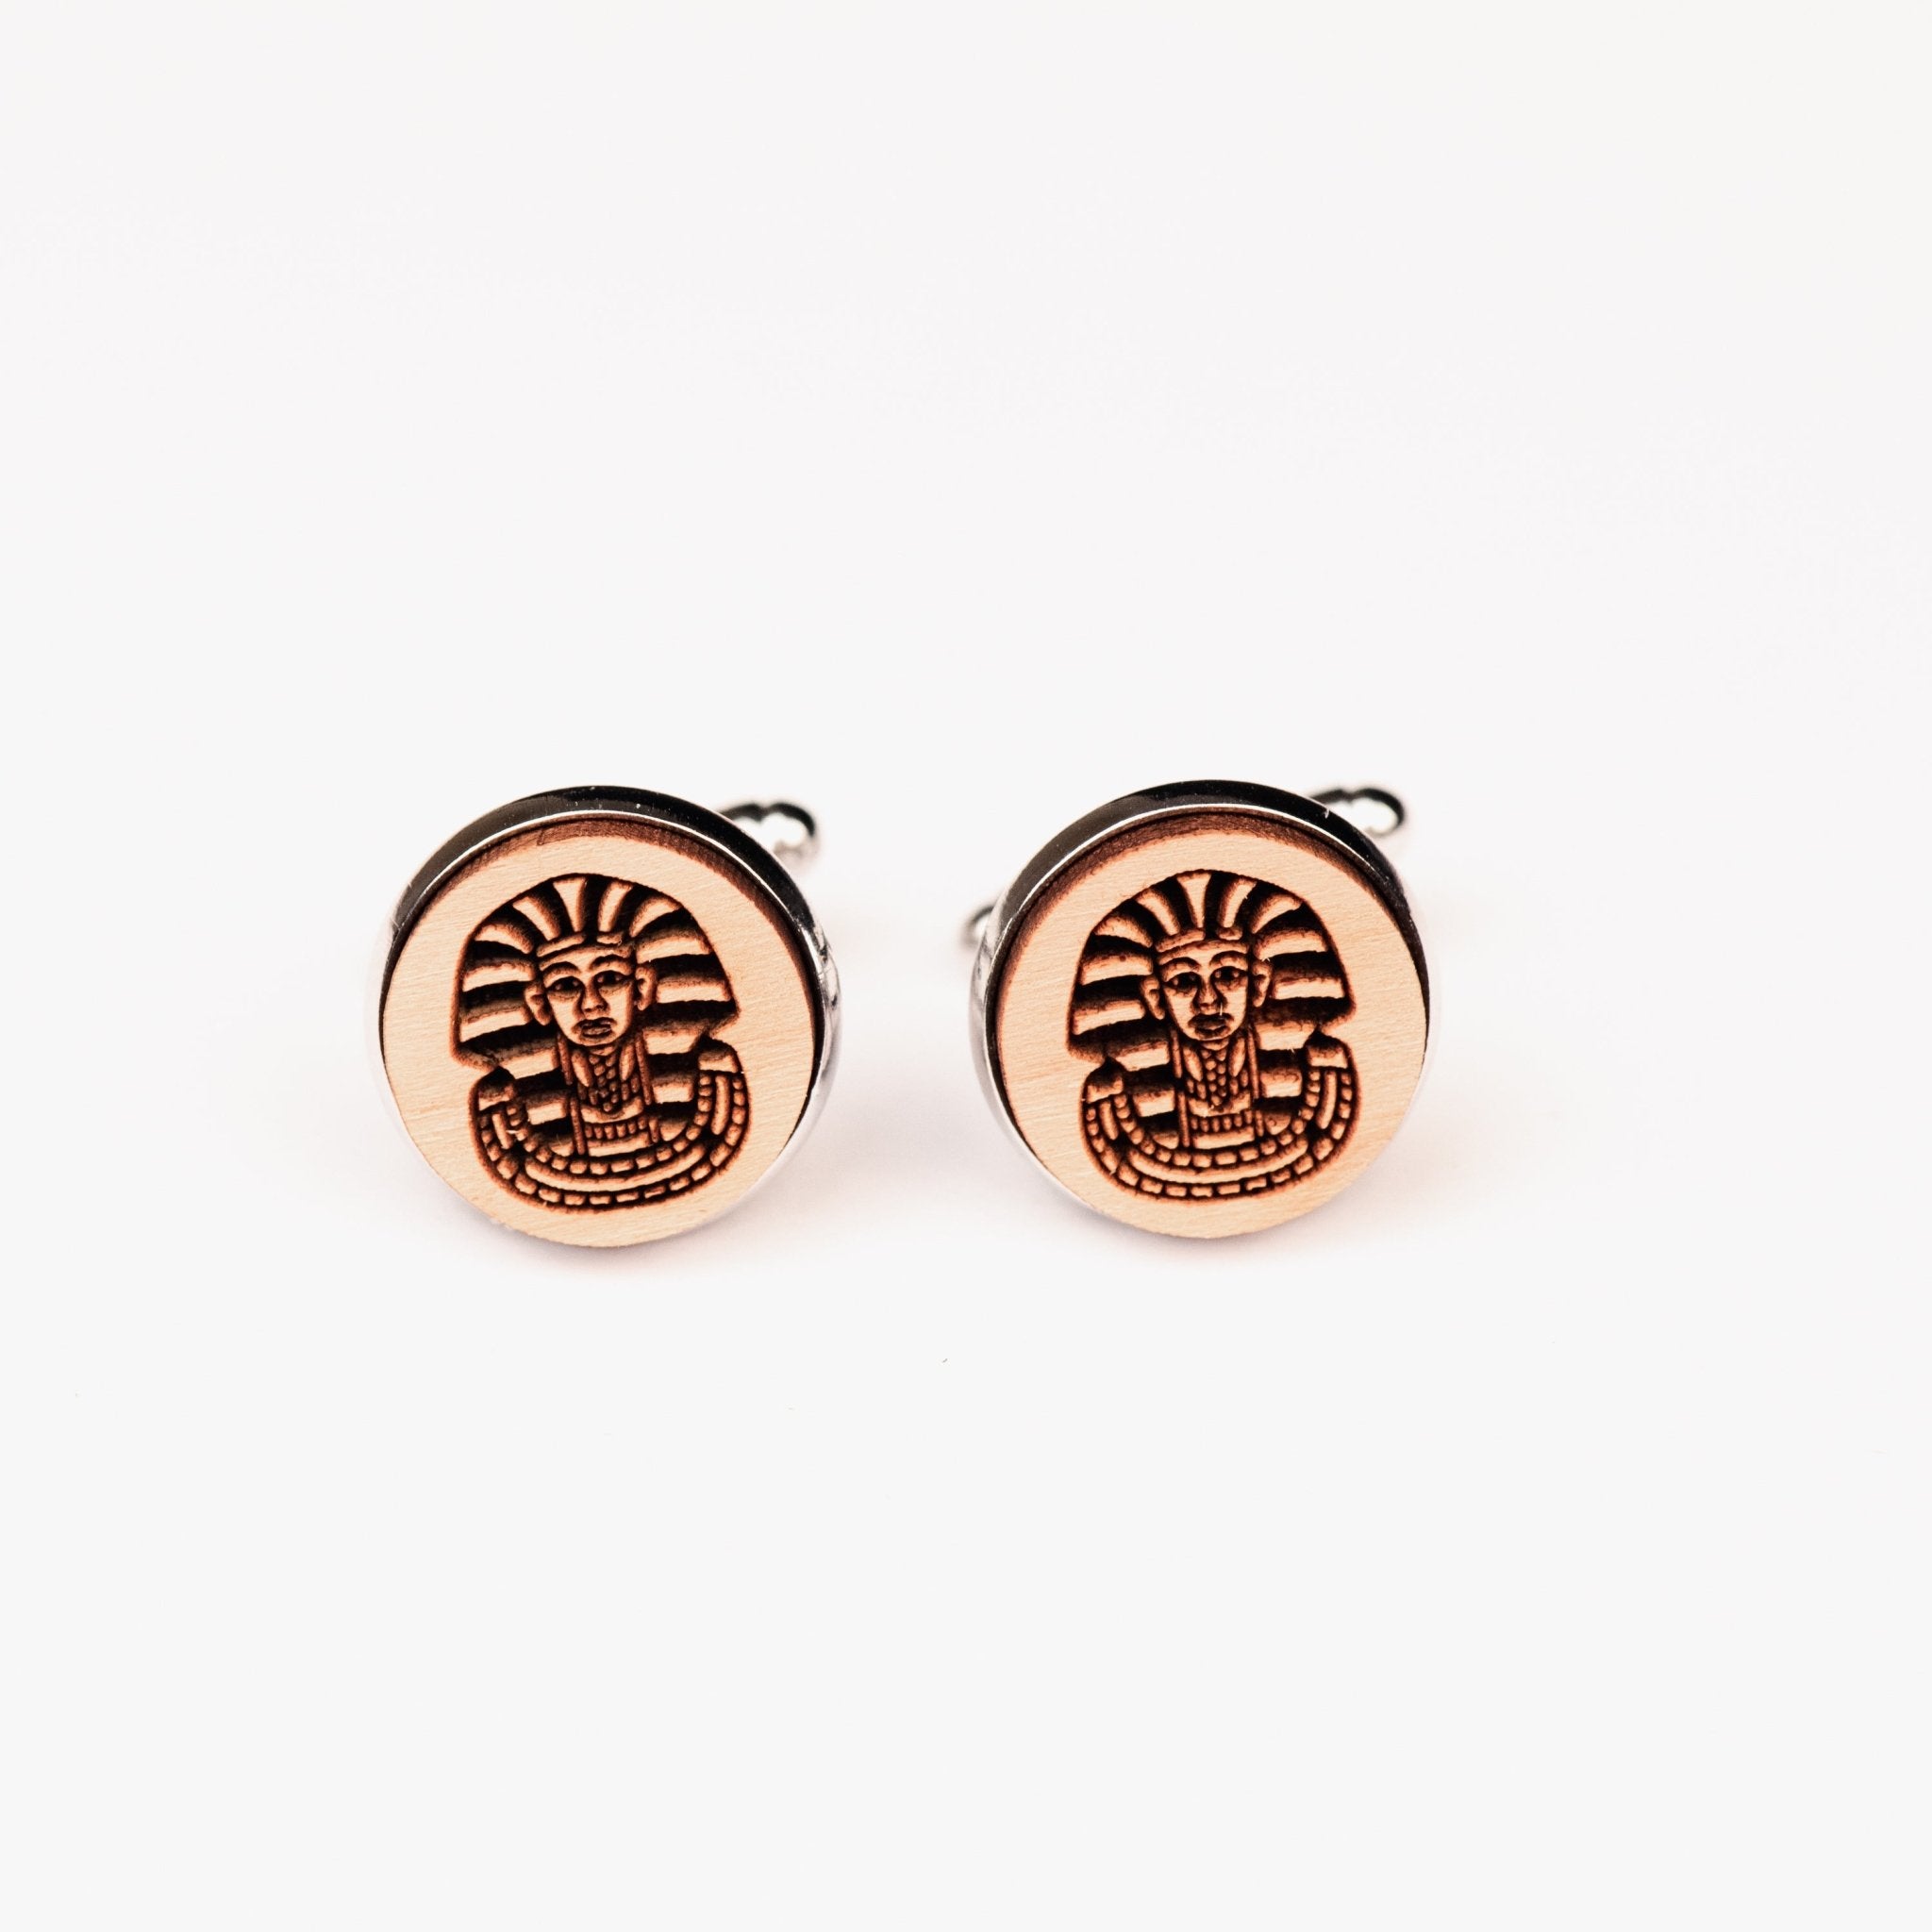 Egyptian Pharaoh Cherry Wood Cufflinks - CT35042 - Robin Valley Official Store